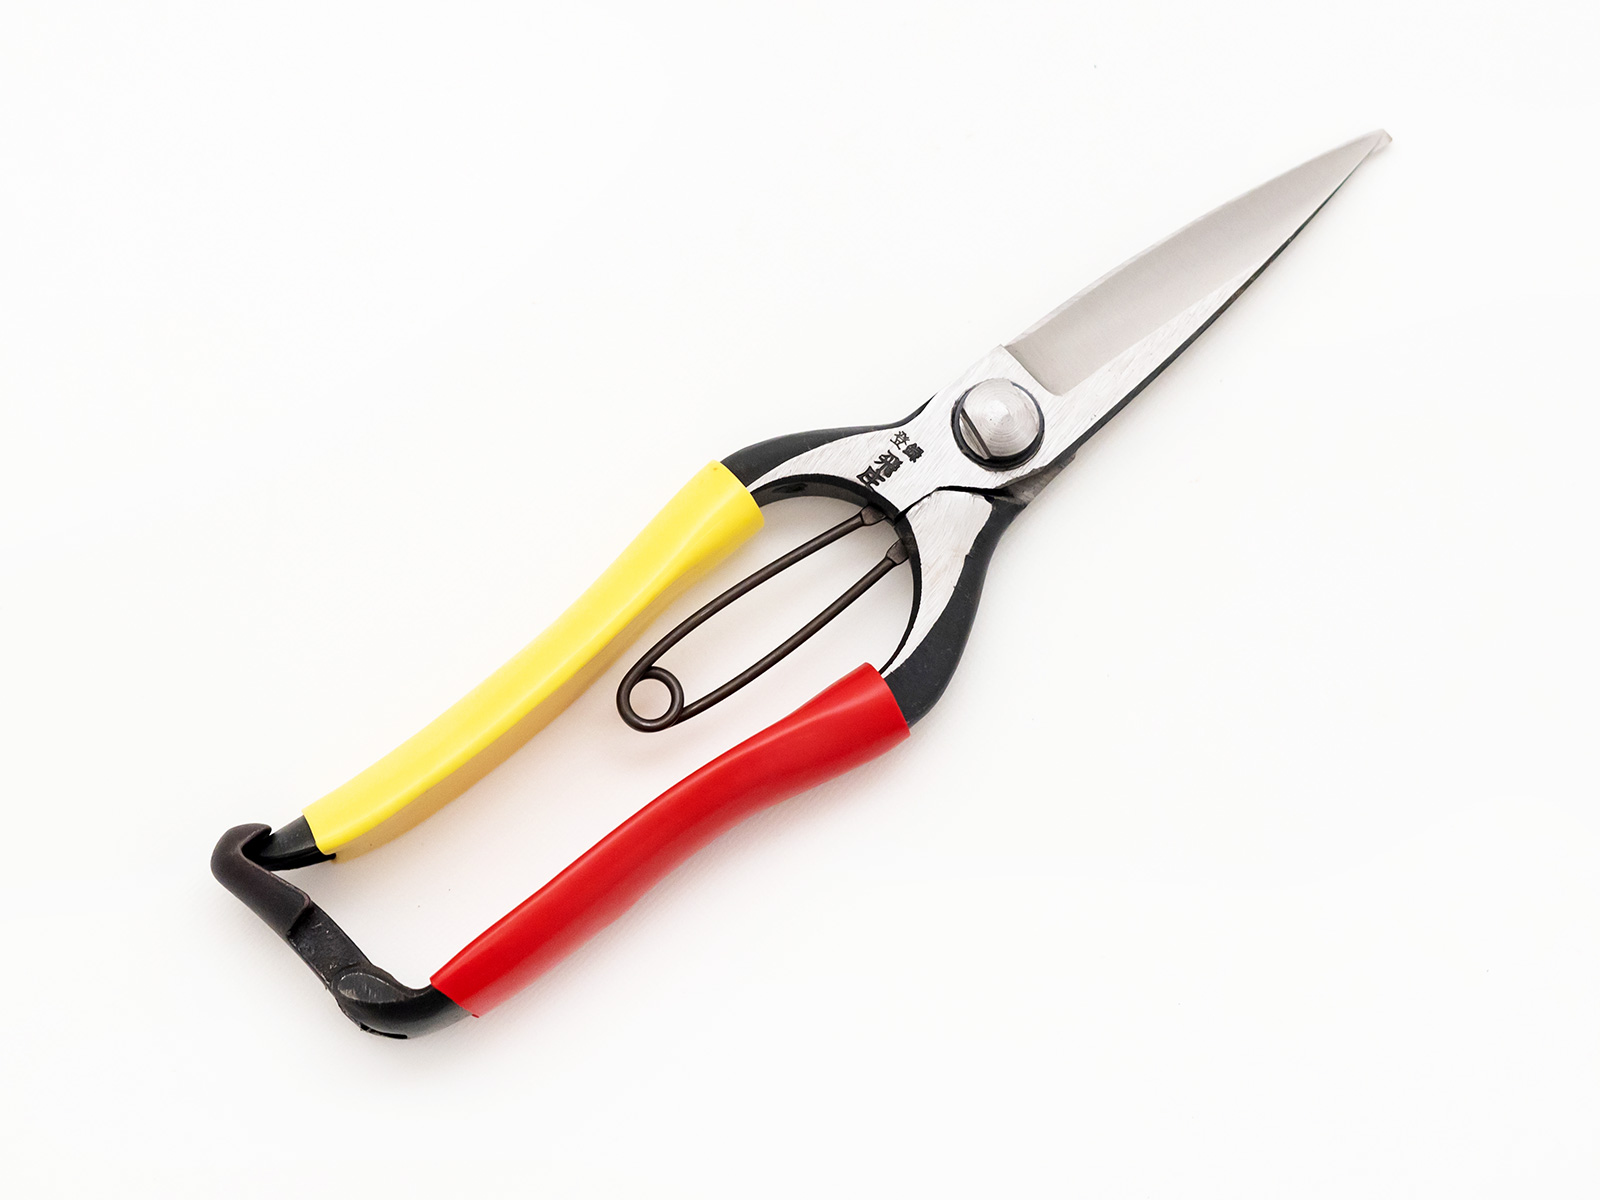 [Tobisho] Cutting buds pruner (200mm edges, Left handed, Red and Yellow taped)